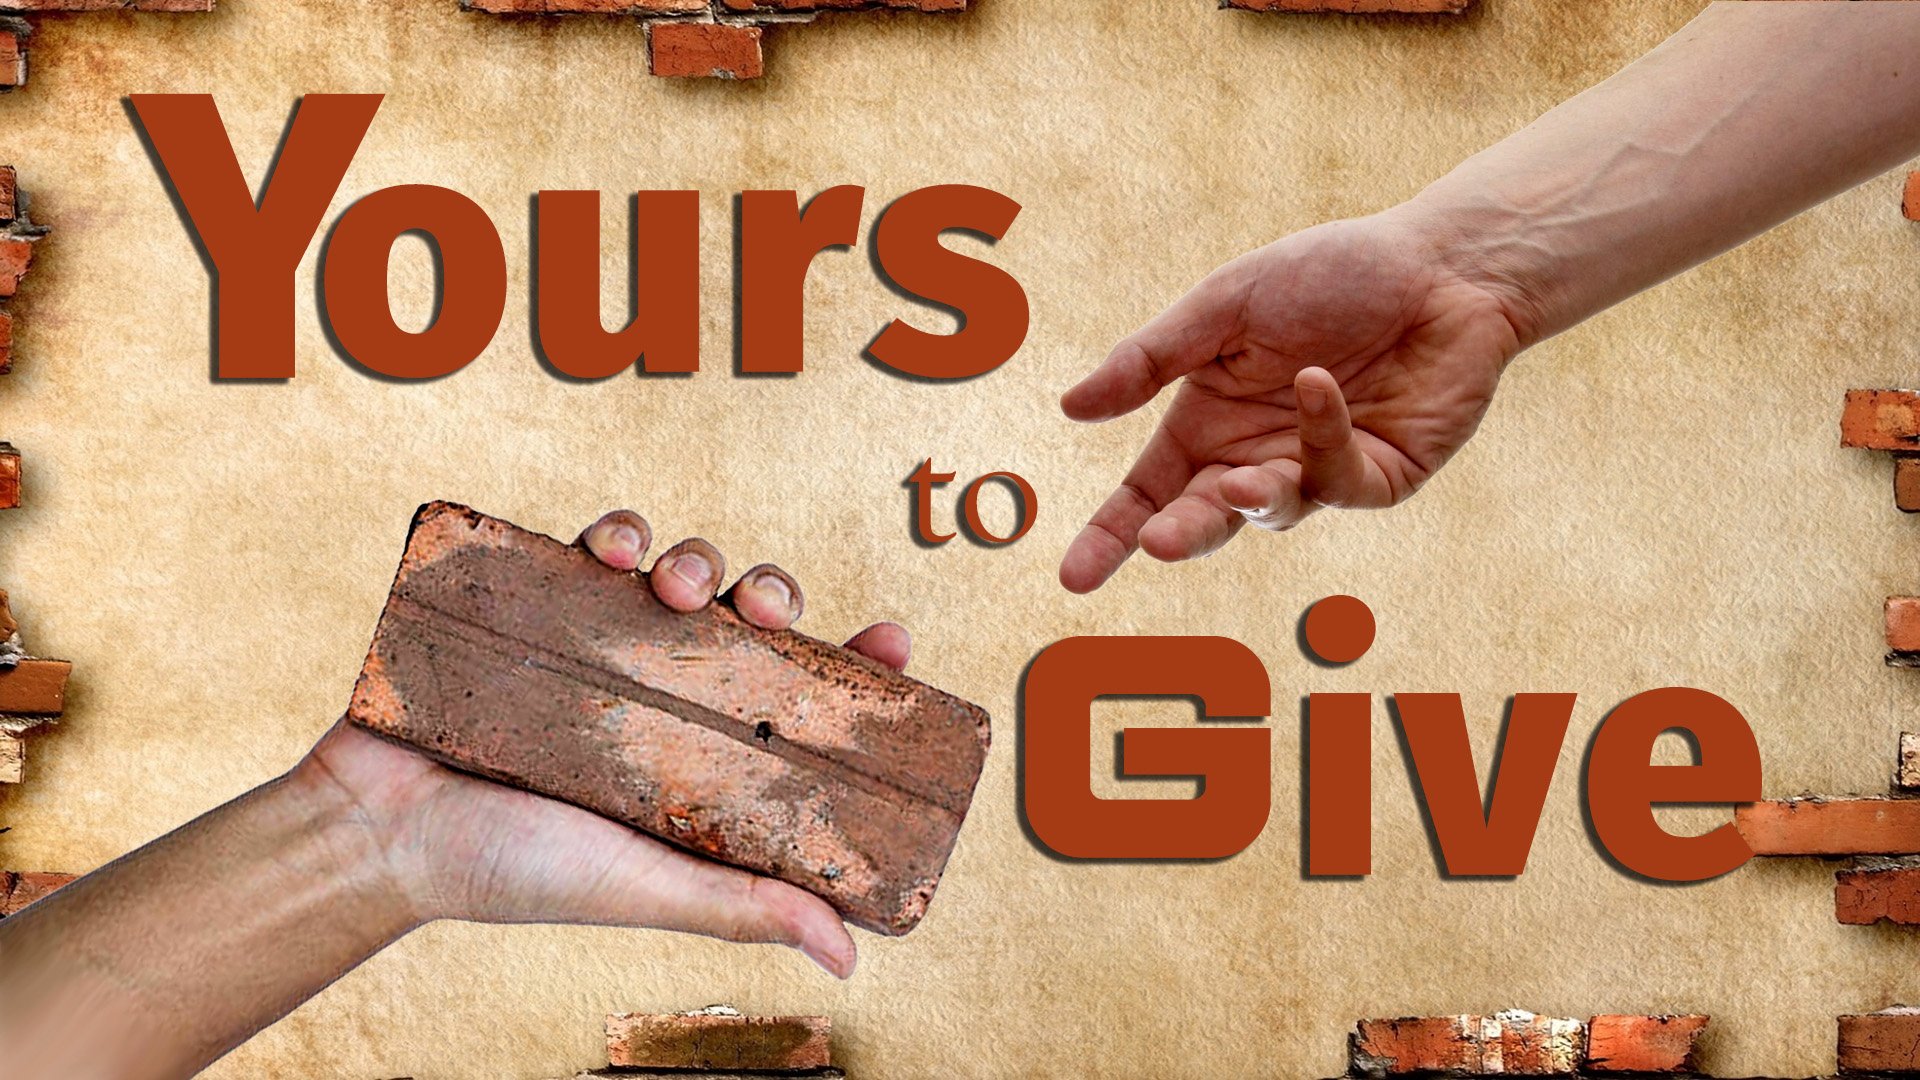 Yours to Give.jpg